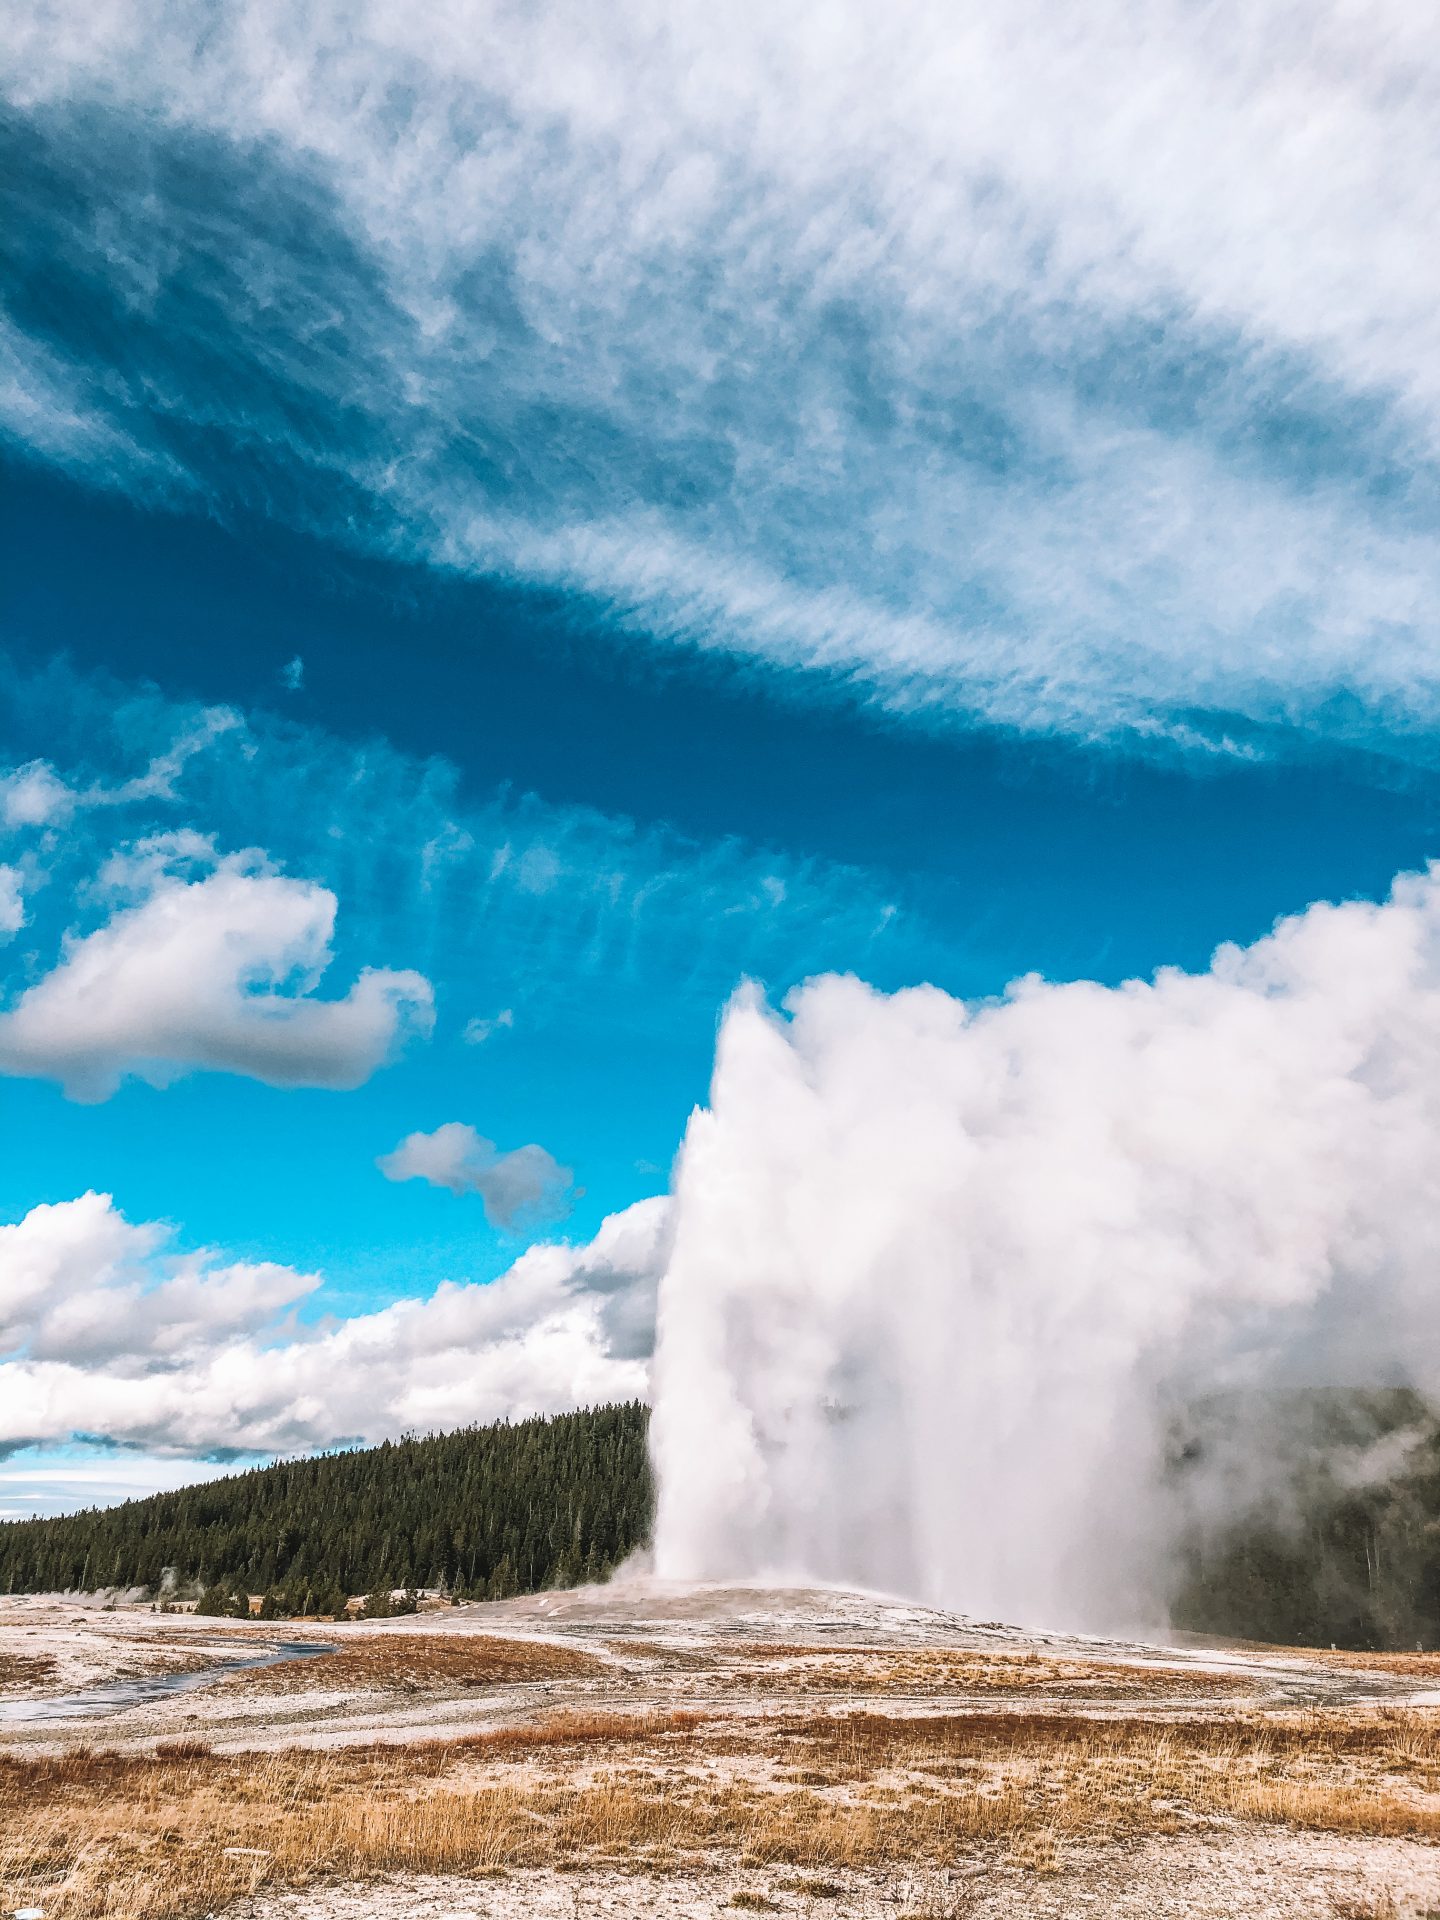 Yellowstone National Park in Wyoming is in my top 10 favorite beautiful places in the US to visit.